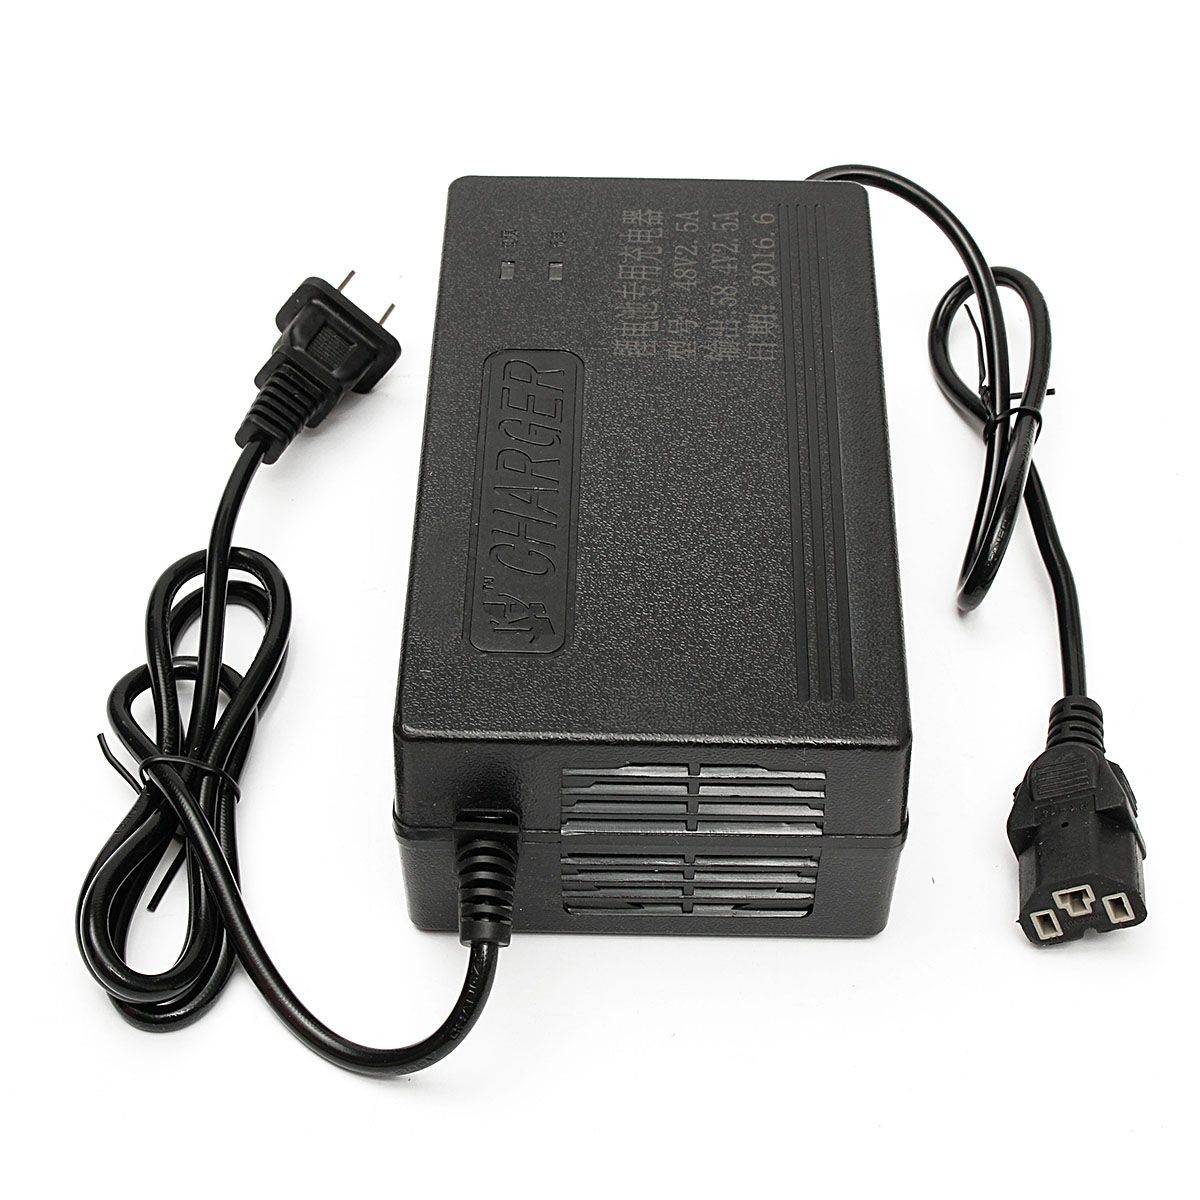 48V 2 5A Output PC Plug Lithium Iron Phosphate Battery Charger for Electric Scooter